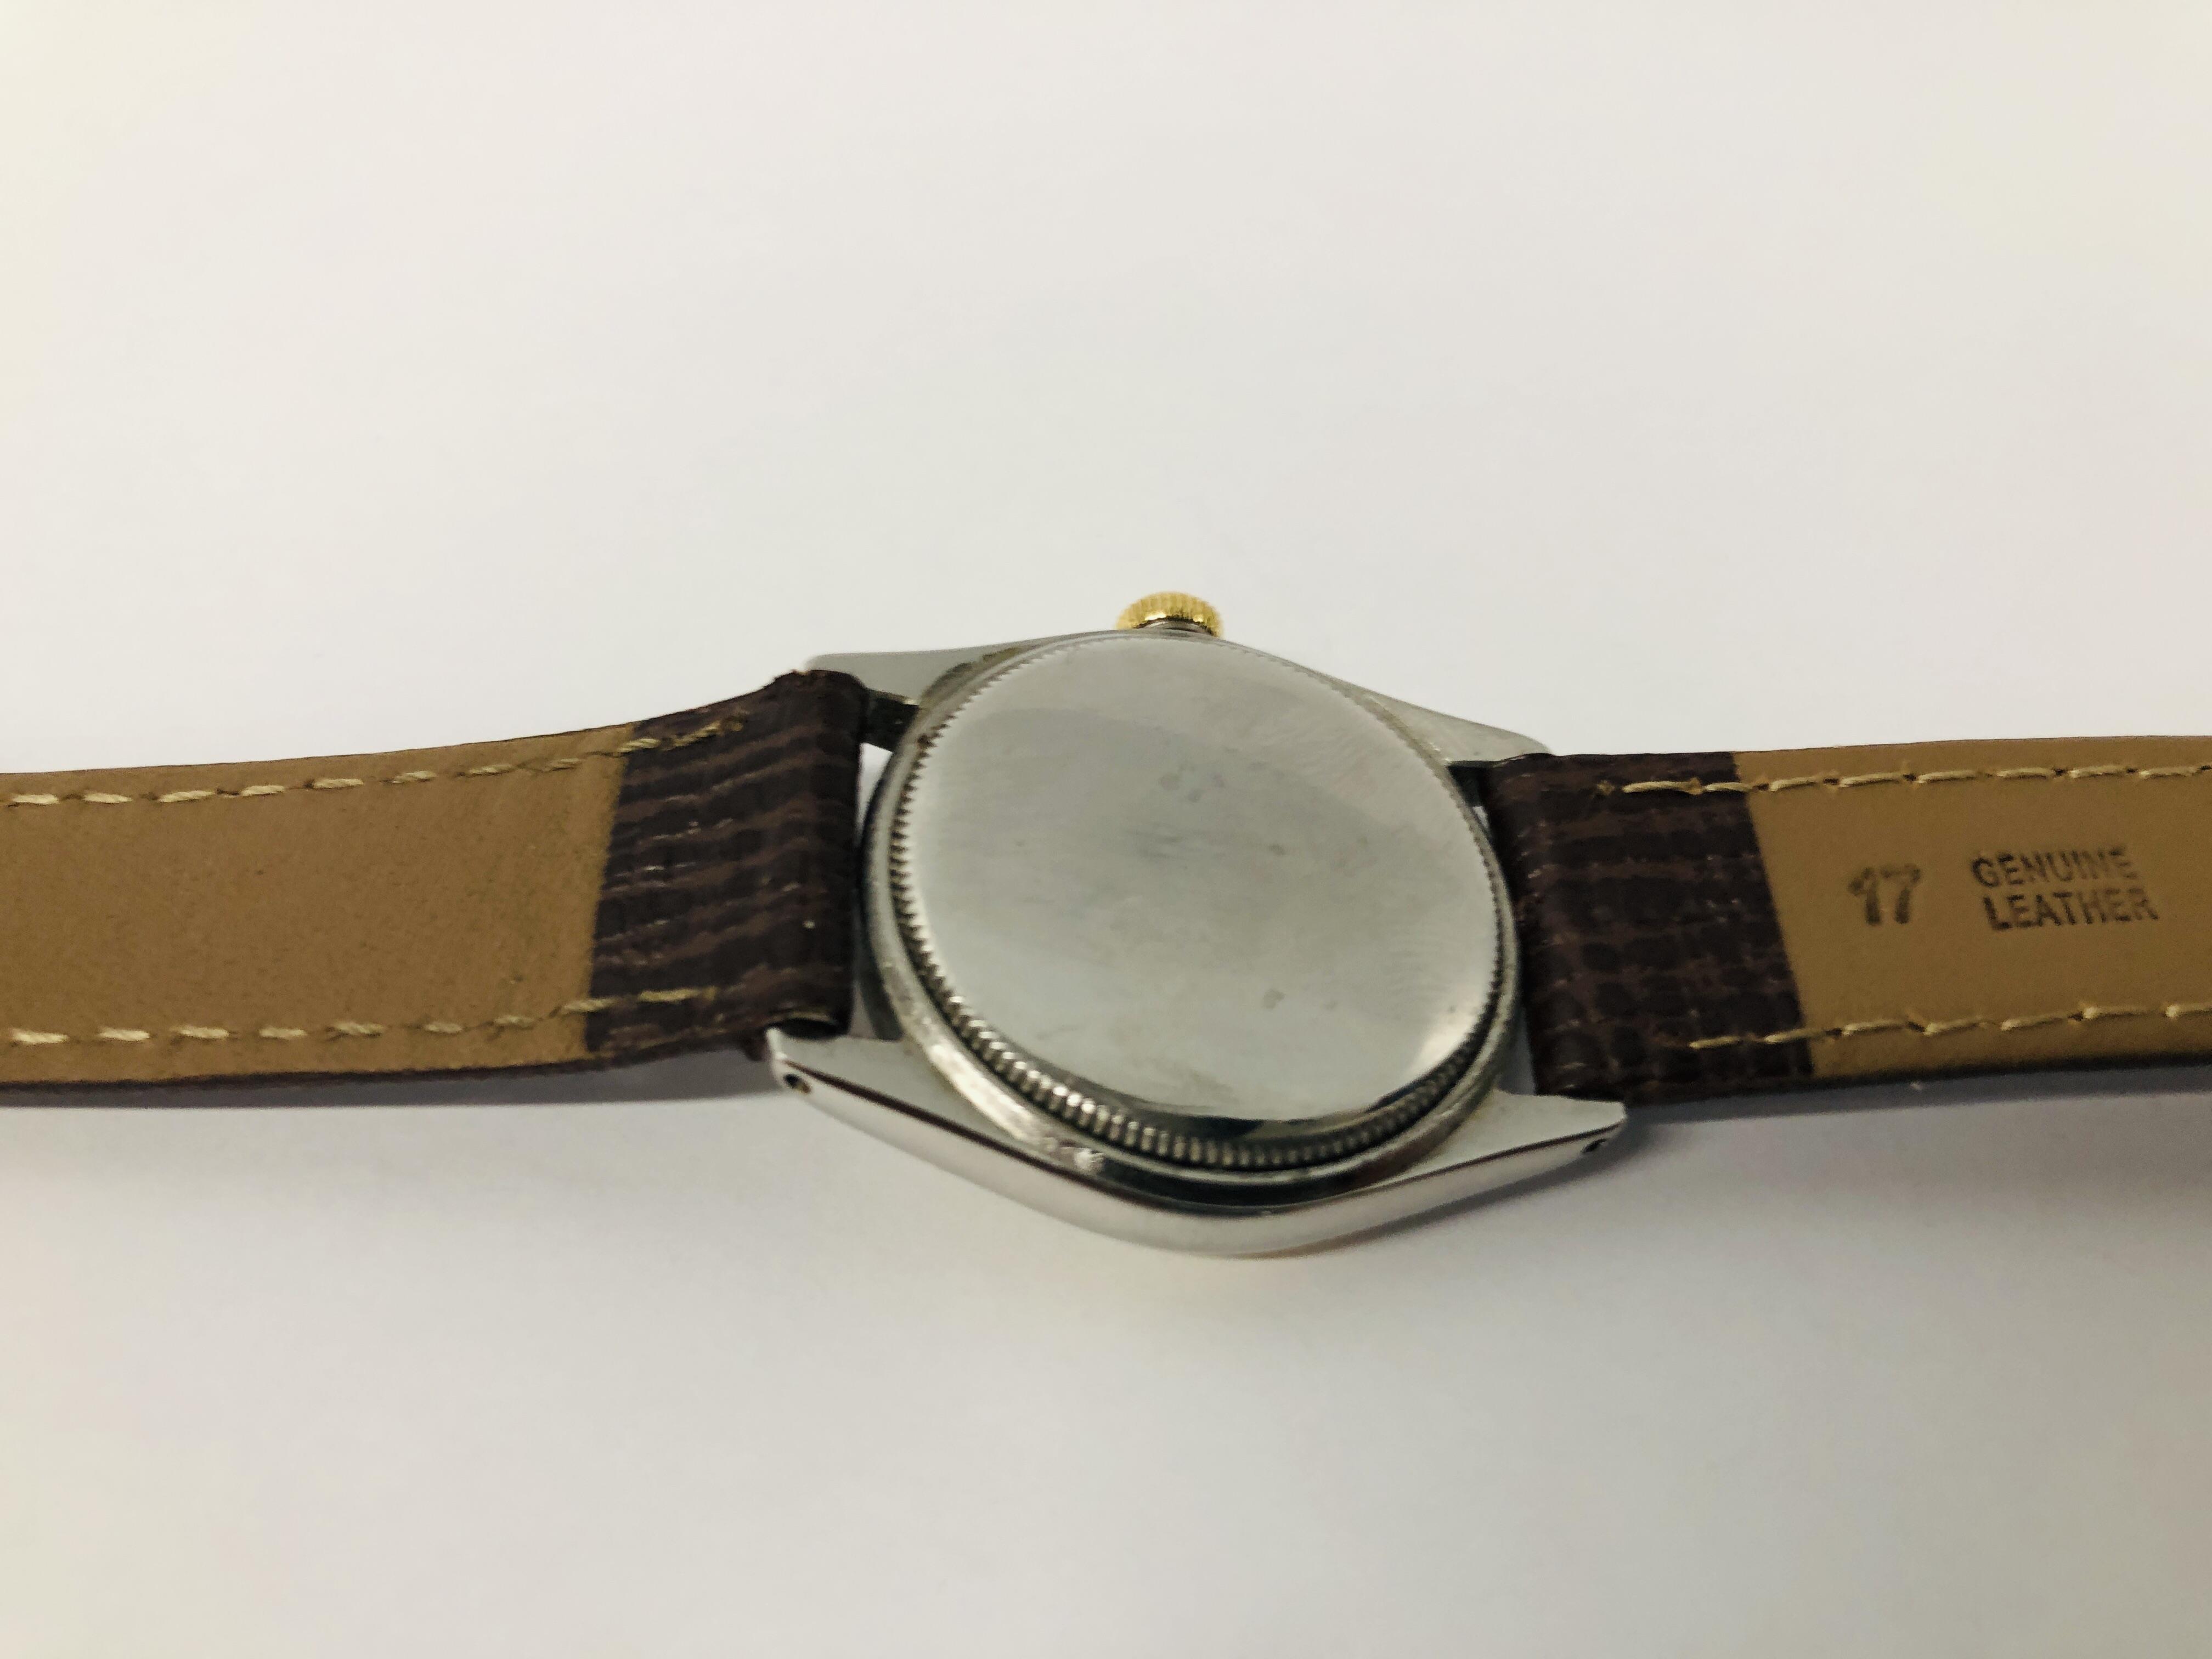 A VINTAGE CIRCA 1950 GENTLEMANS ROLEX OYSTER WRIST WATCH ON BROWN LEATHER REPLACEMENT STRAP. - Image 8 of 10